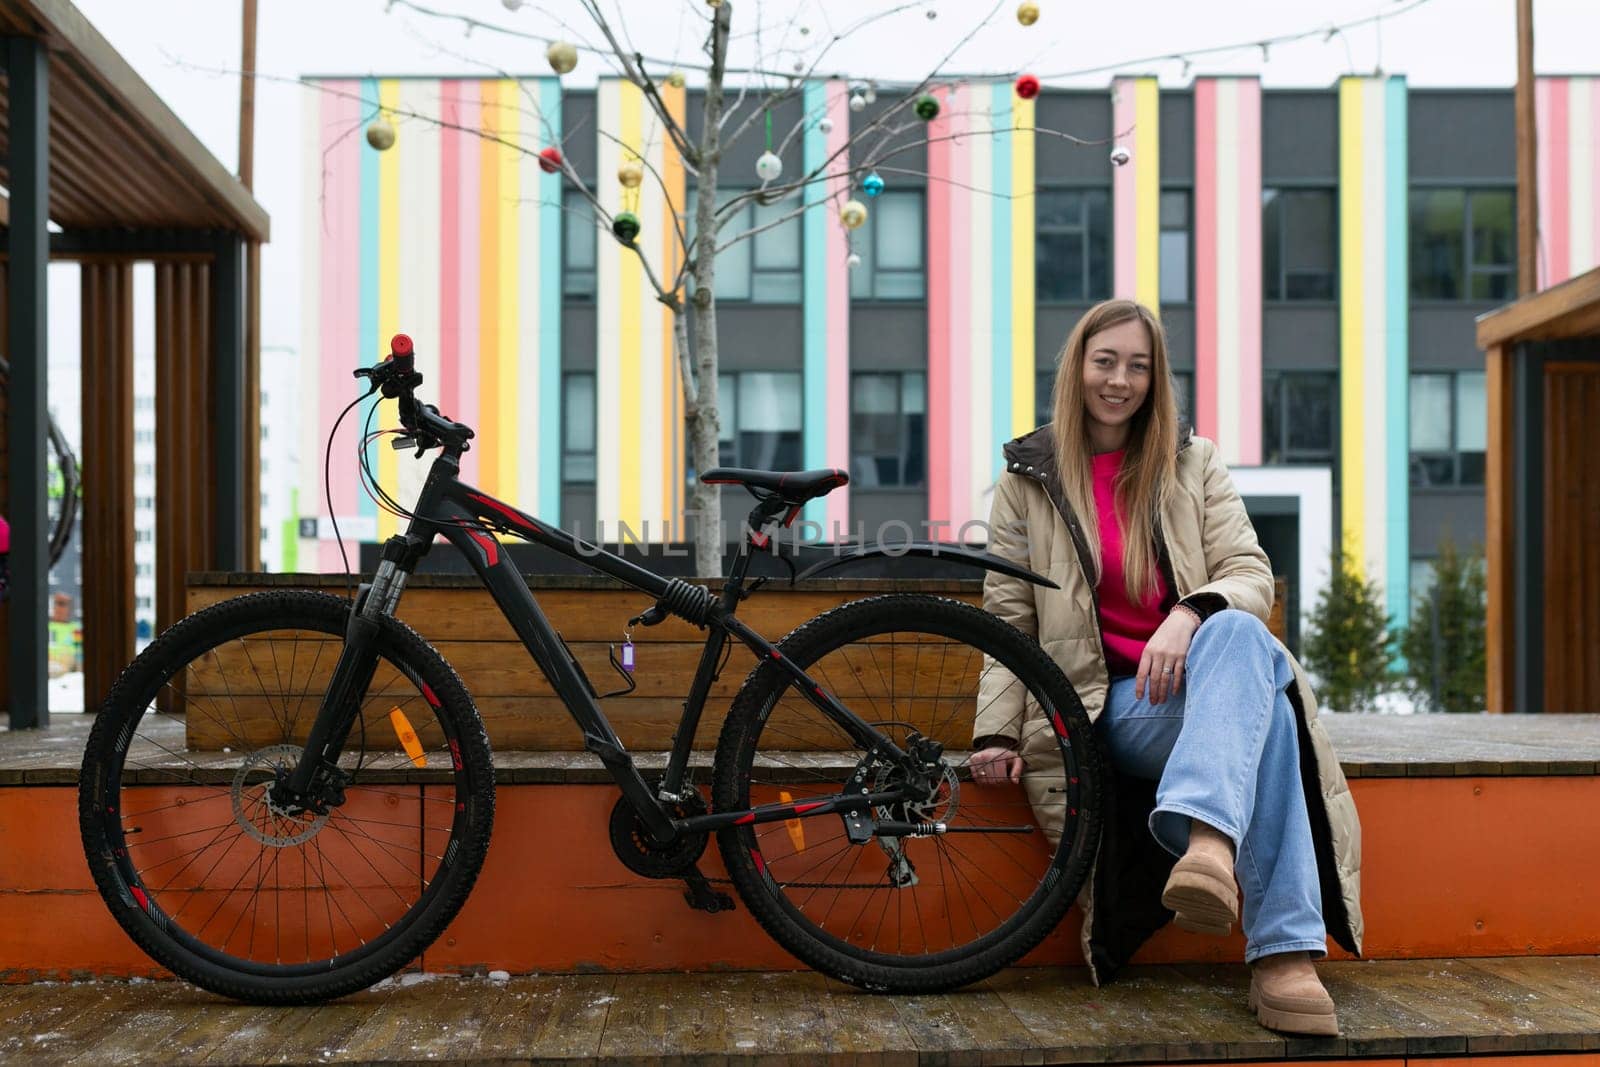 A woman in casual attire sits on a wooden bench placed beside a black bicycle. She appears relaxed and is gazing ahead. The bicycle leans against the bench, adding to the urban setting.